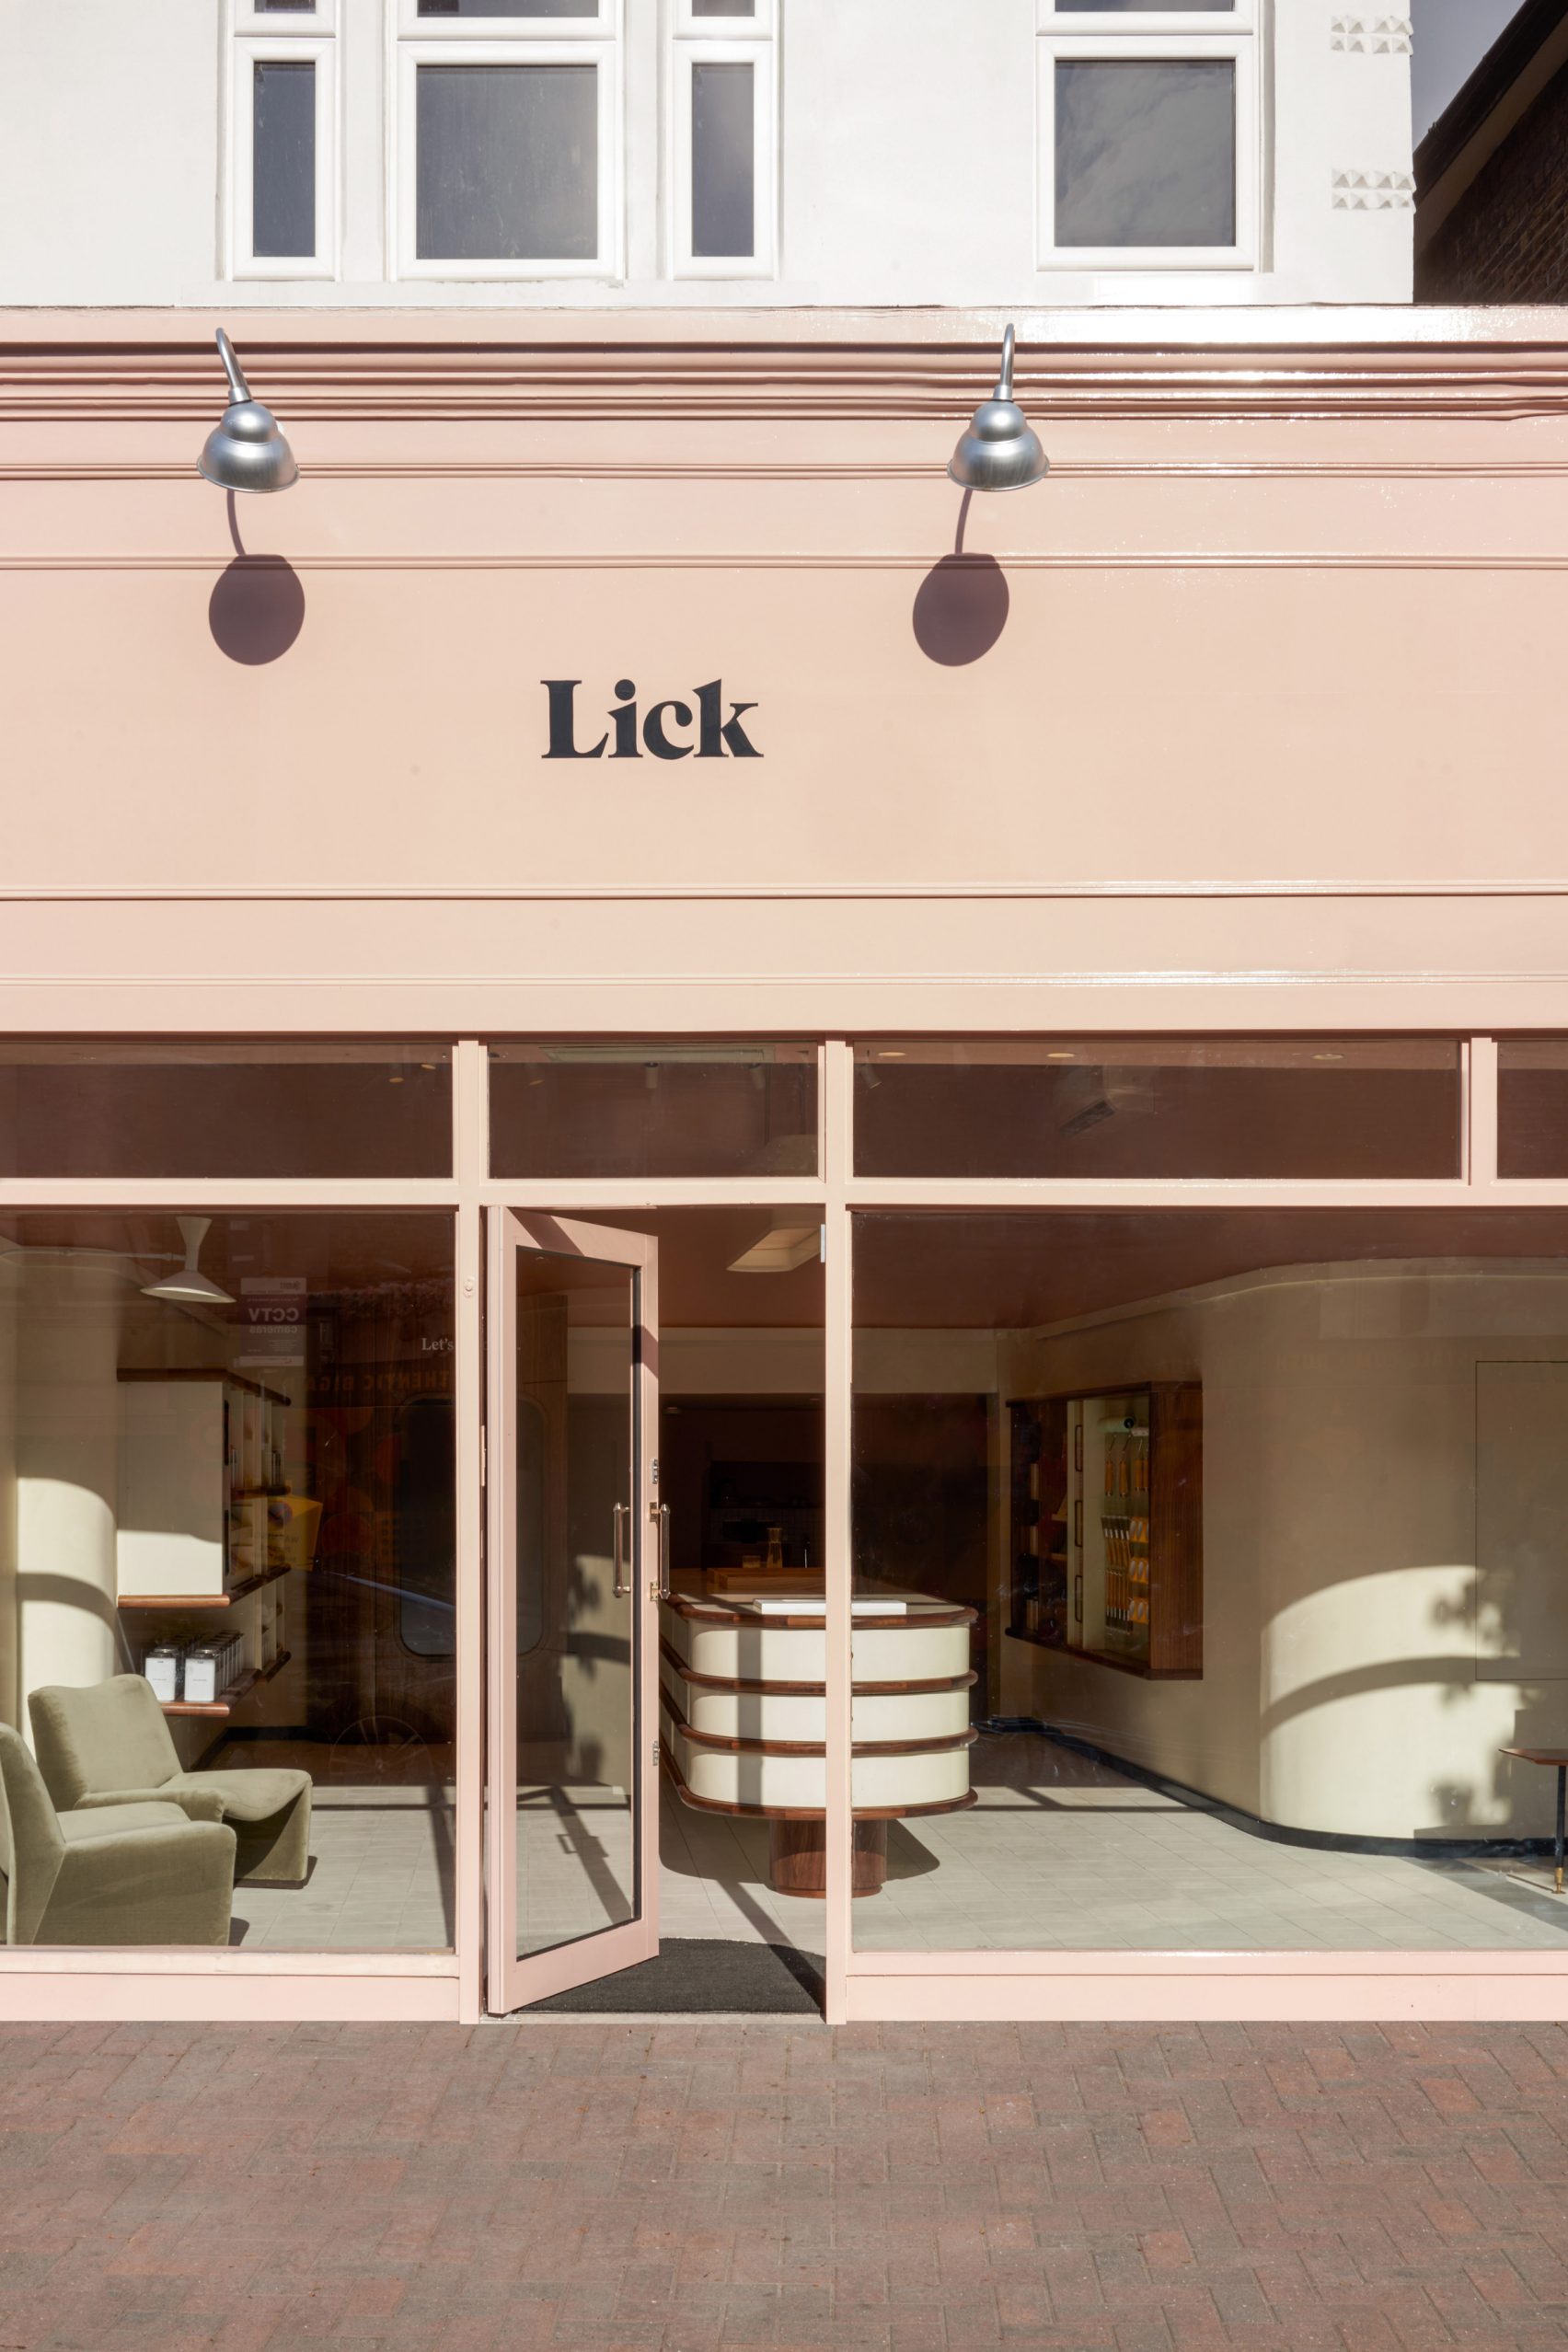 Lick paint shop in London has pink interiors